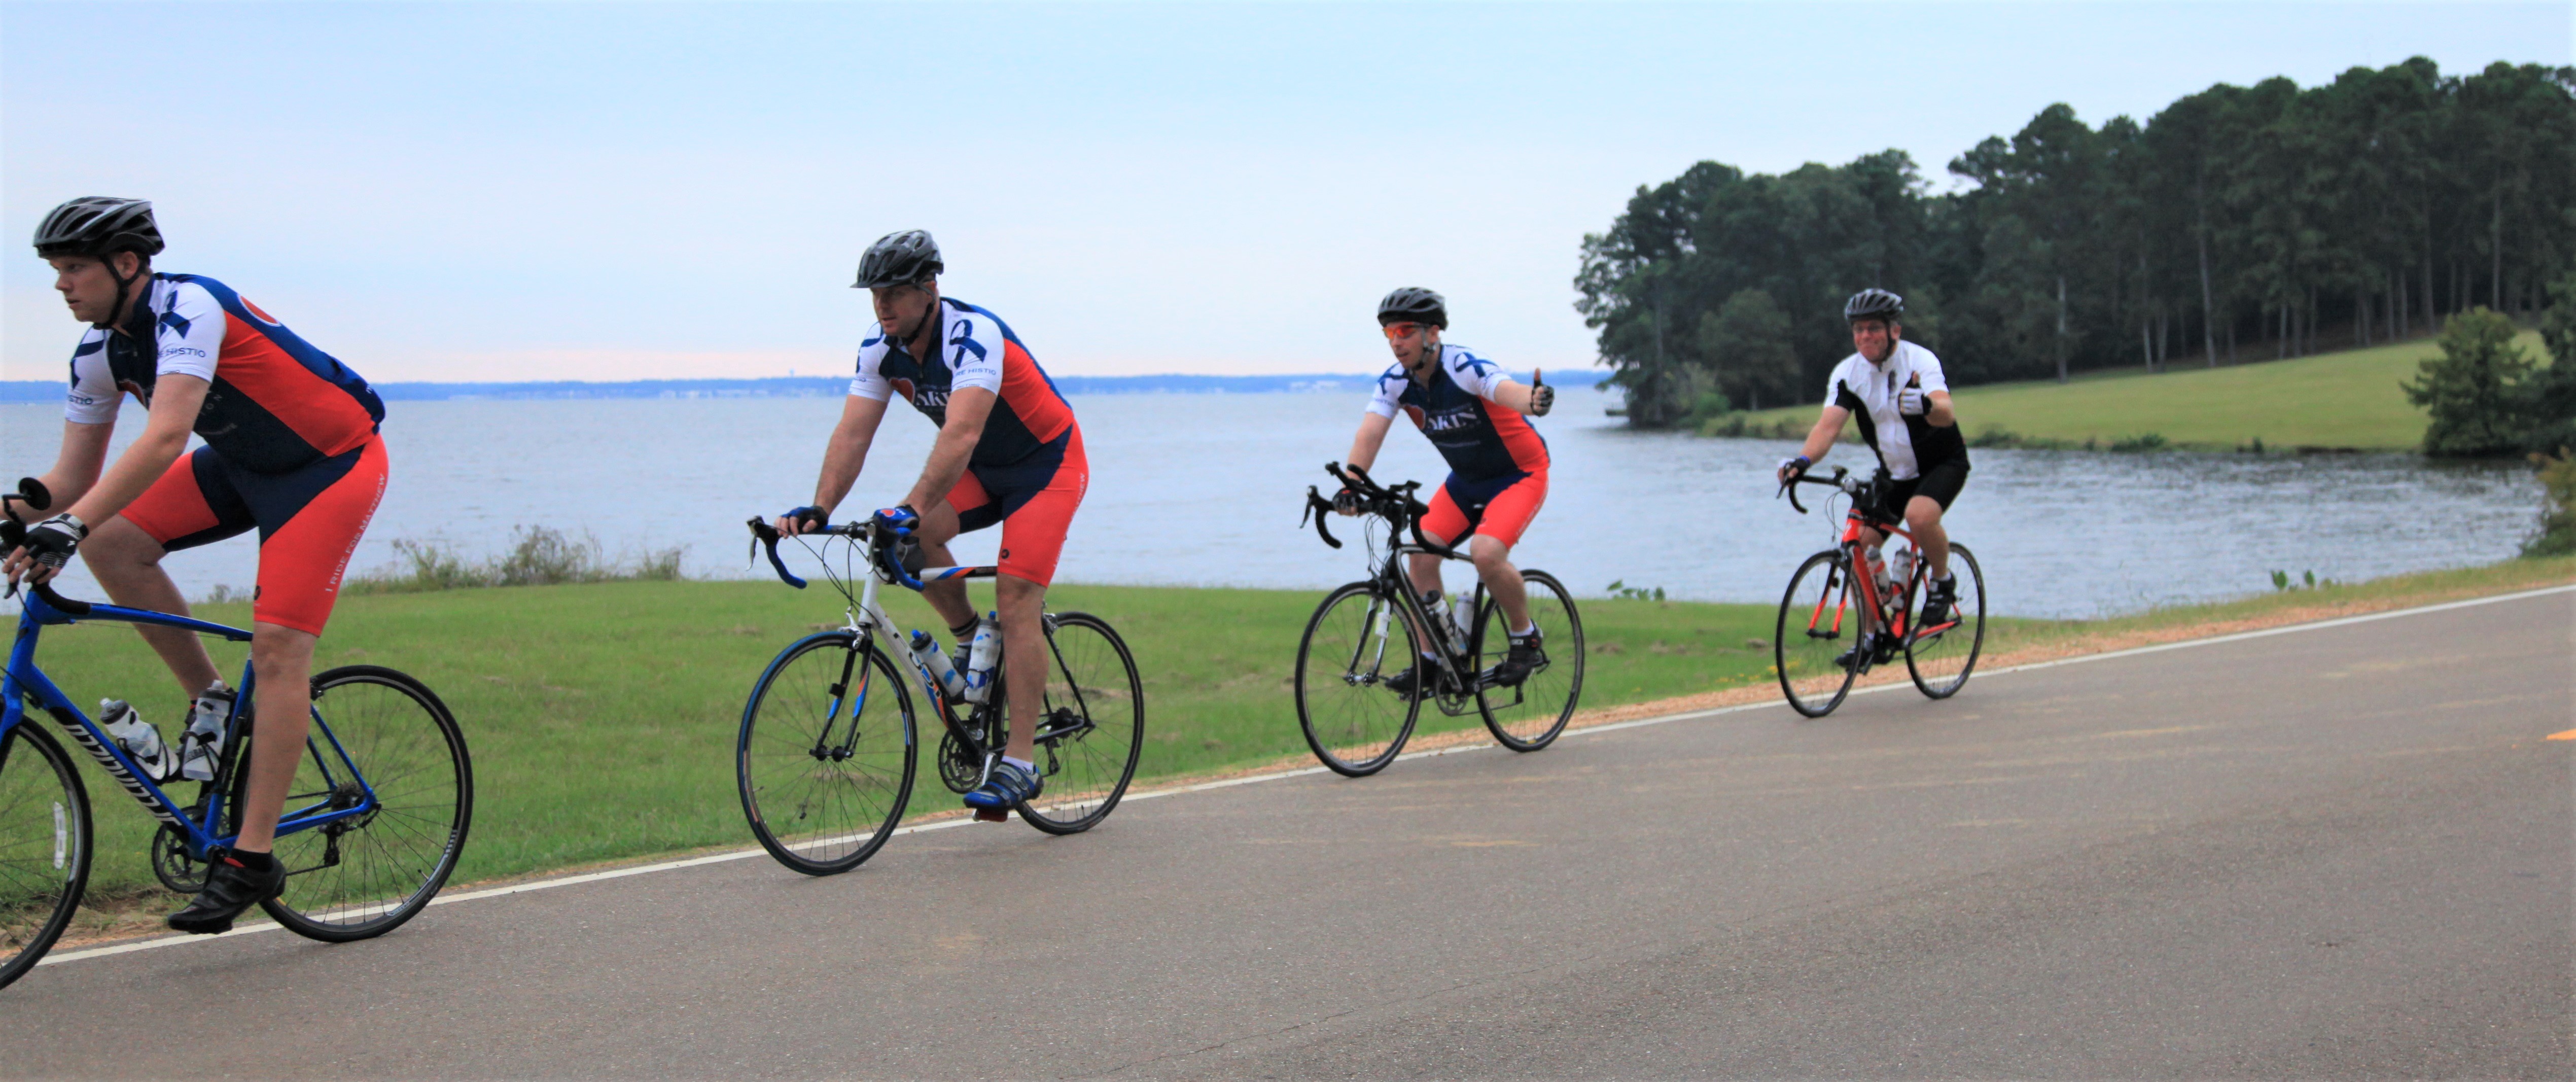 3 bicycle riders pass a lake during 700-mile HLH fundraising ride